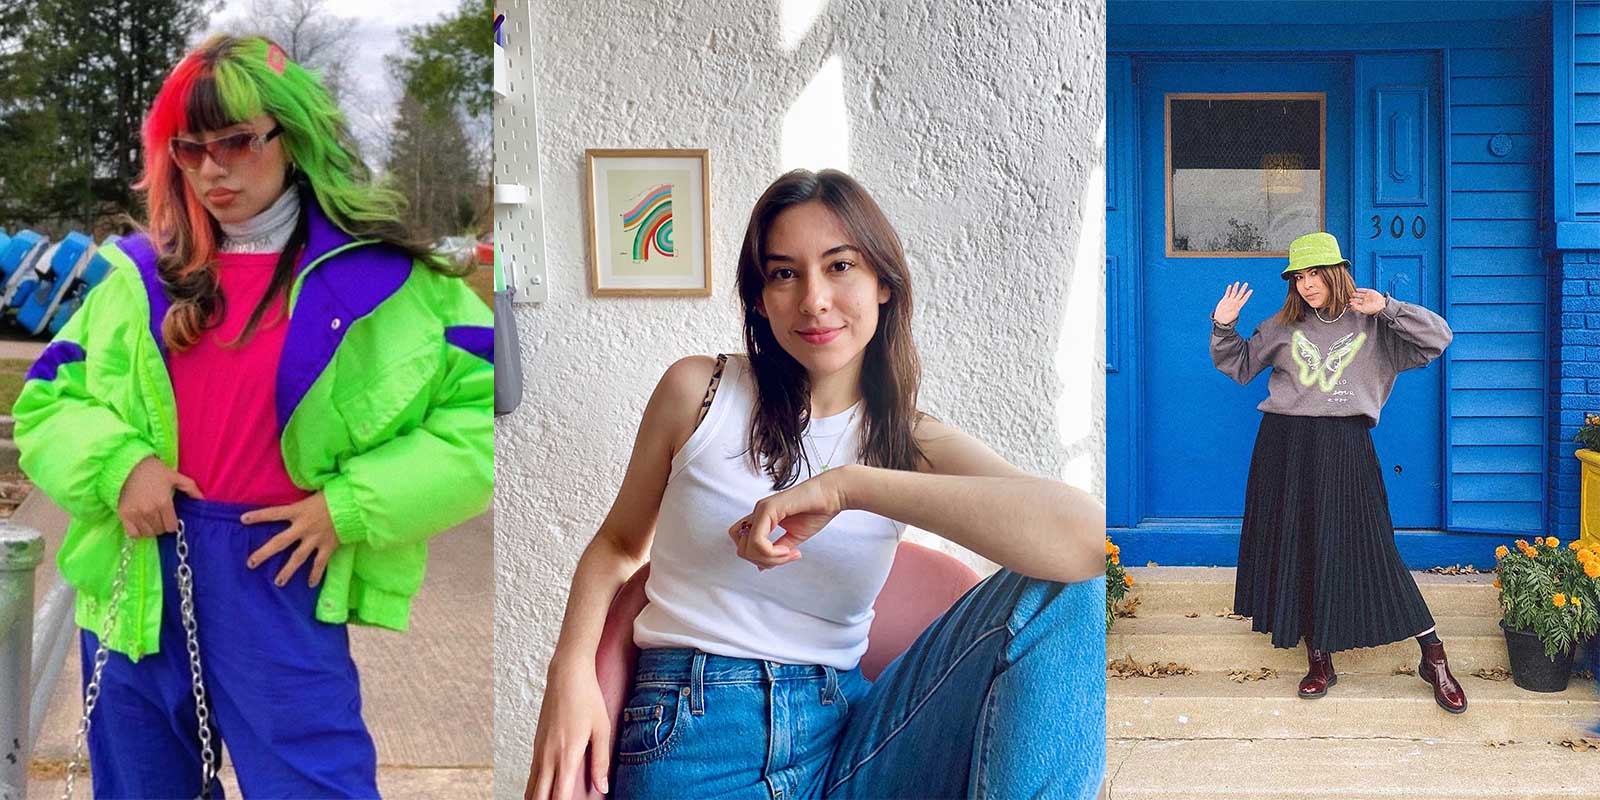 Left to right: girl with neon multi colored hair wearing an 80's neon tracksuit, girl posing on a chair with her elbow on her knee, she is wearing blue jeans and a white tank top, and girl posing in front of a bright blue building wearing a maxi skirt, a sweatshirt and a bucket hat 